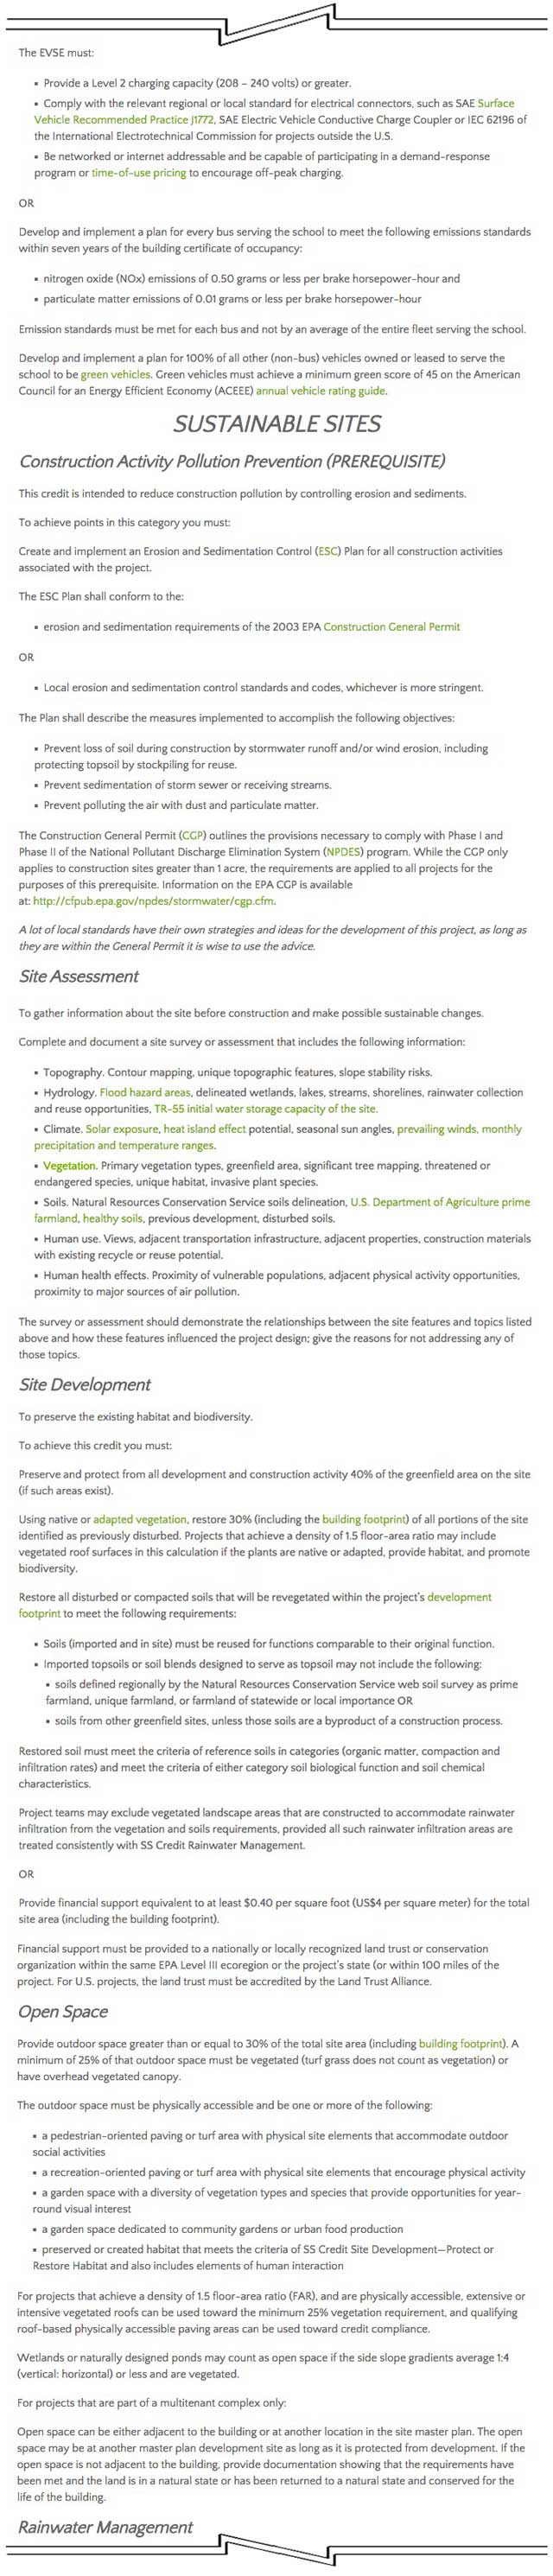 Community-Based Eco-Resource Allocation – Jacky Tustain (Project Manager) also continued helping us convert the LEED Certification research done by Matheus Manfredini (Civil Engineering Student and Urban Design Coordinator) into a webpage. Here are the 4th round of pictures of this LEED Tutorial page developing on the site, continuing with formatting and content editing. We’d say we’re about 50% complete with this tutorial.